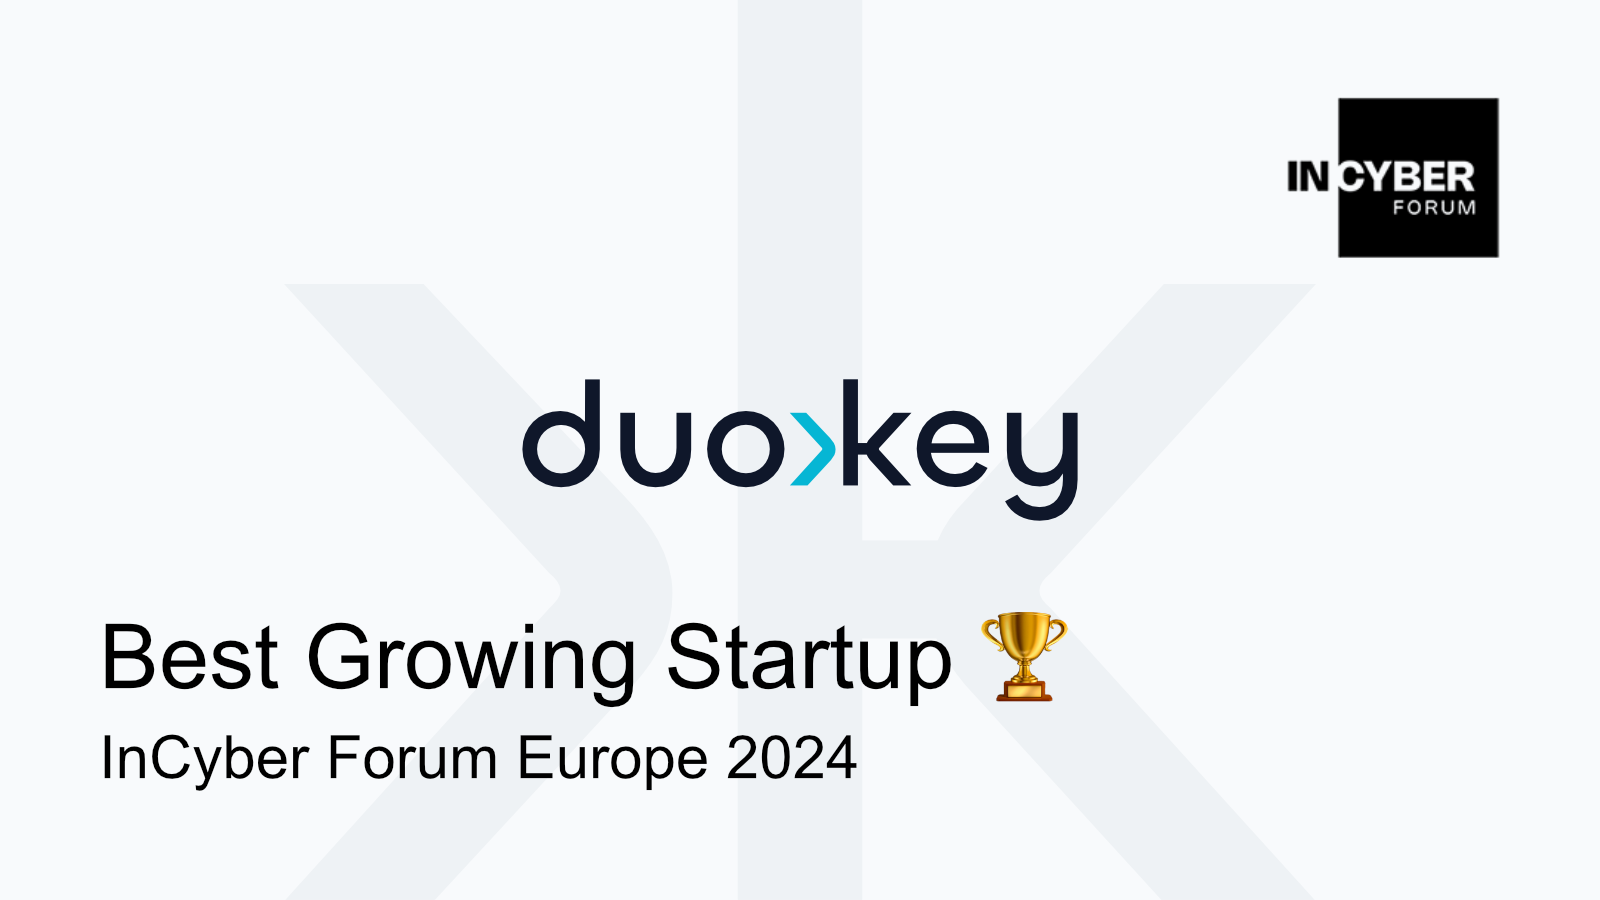 DuoKey Best Growing Startup InCyber Forum